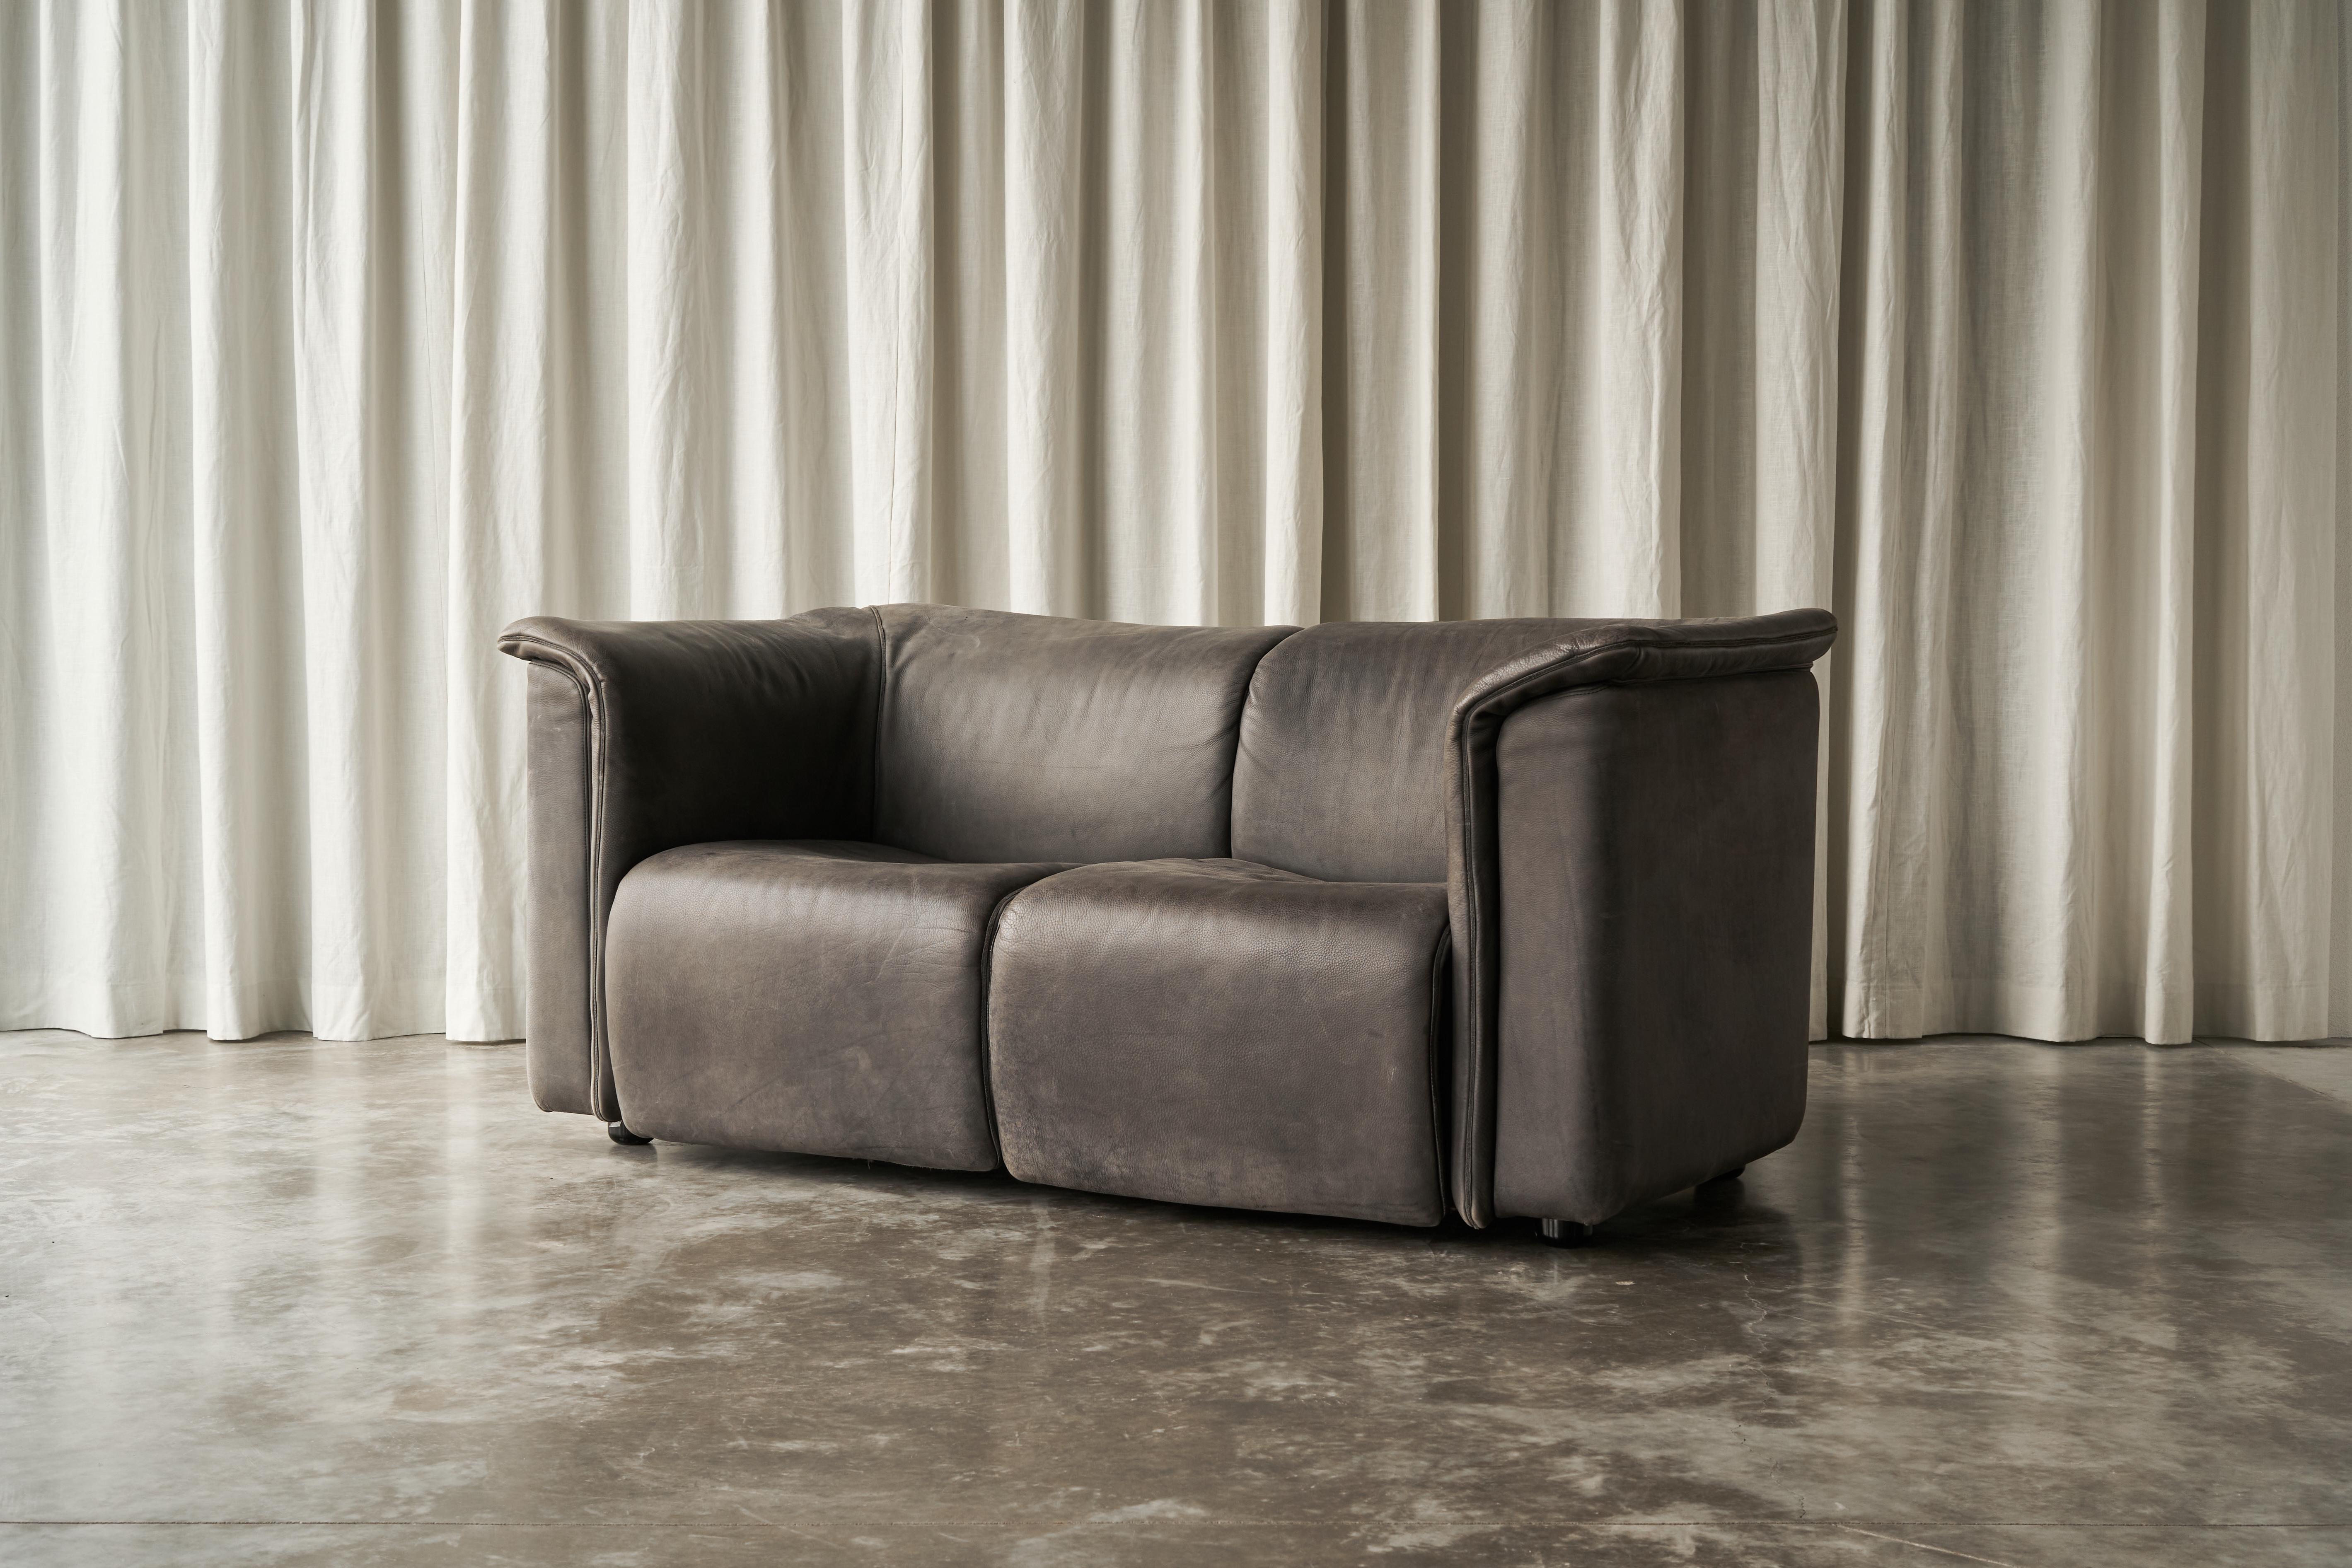 Karl Wittmann Sofa in Patinated Grey Leather, Austria, 1980s.

This modernistic sofa was designed early 1980s, by Karl Wittmann, for Wittmann Möbelwerkstätten. This Austrian furniture brand is internationally renowned for its high-end quality, which